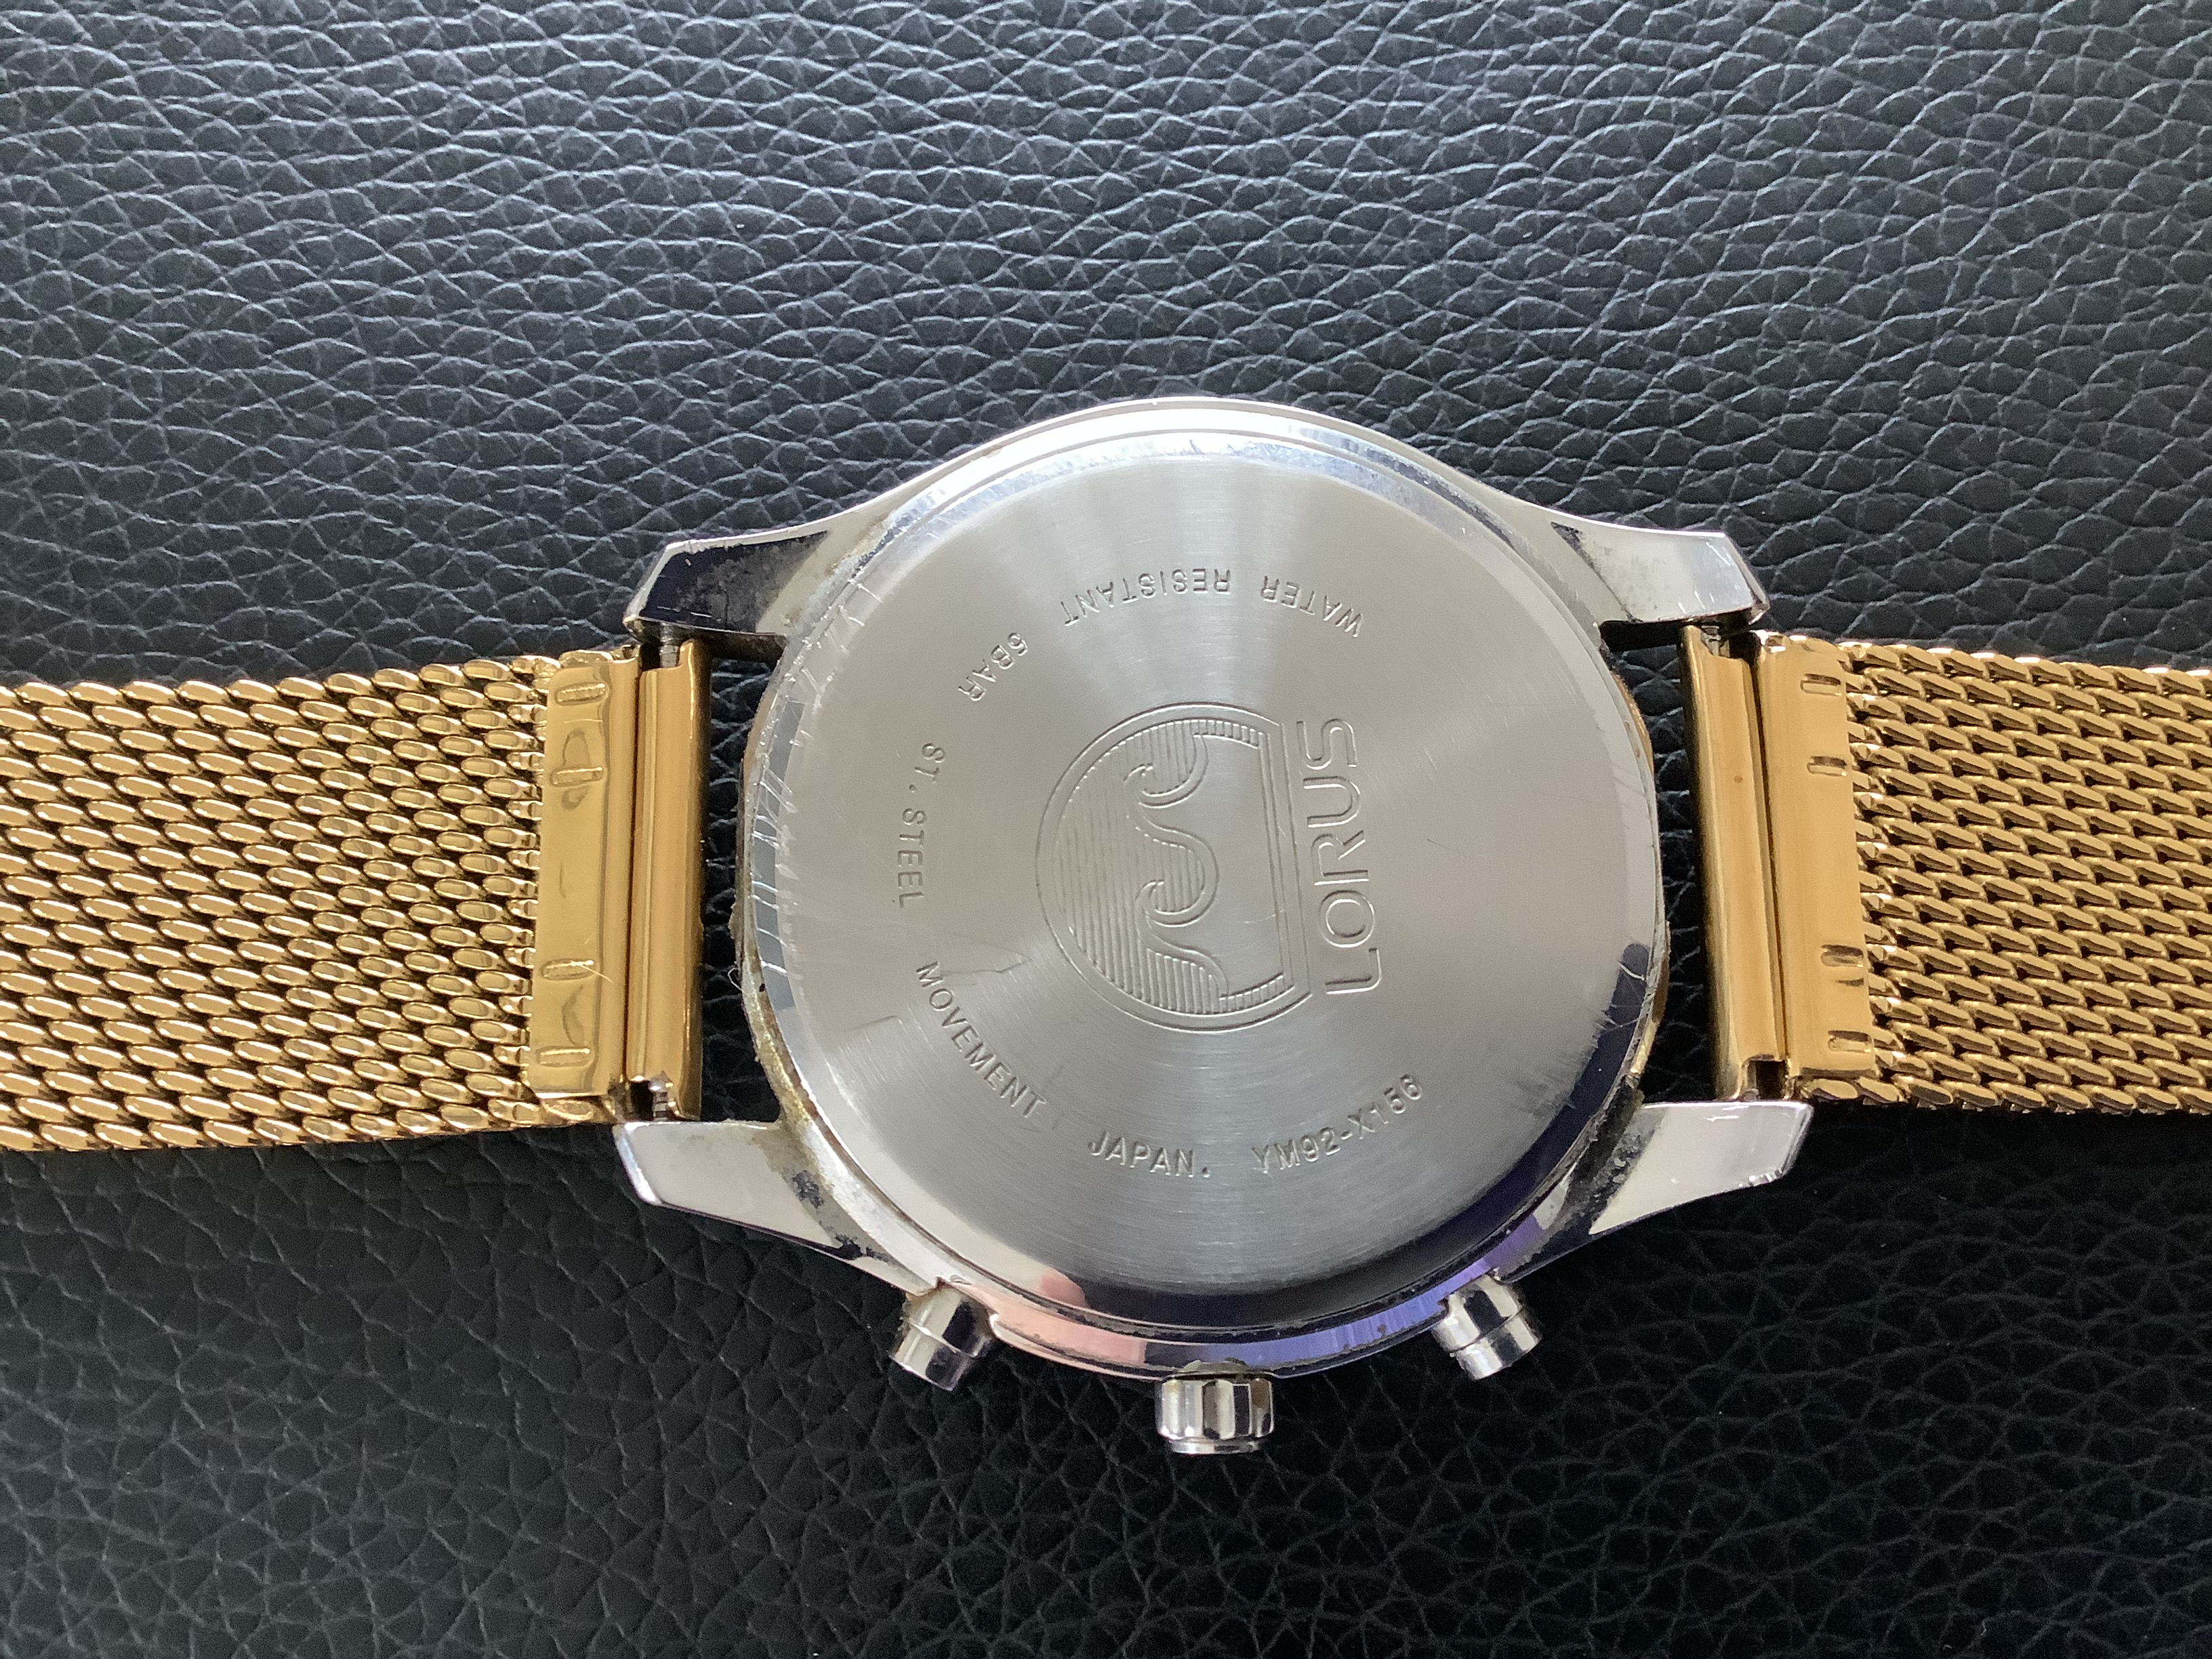 Smart & Elegant Lorus Gold Plated Chronograph Wristwatch (GS 183) Here is a really Smart & - Image 6 of 6